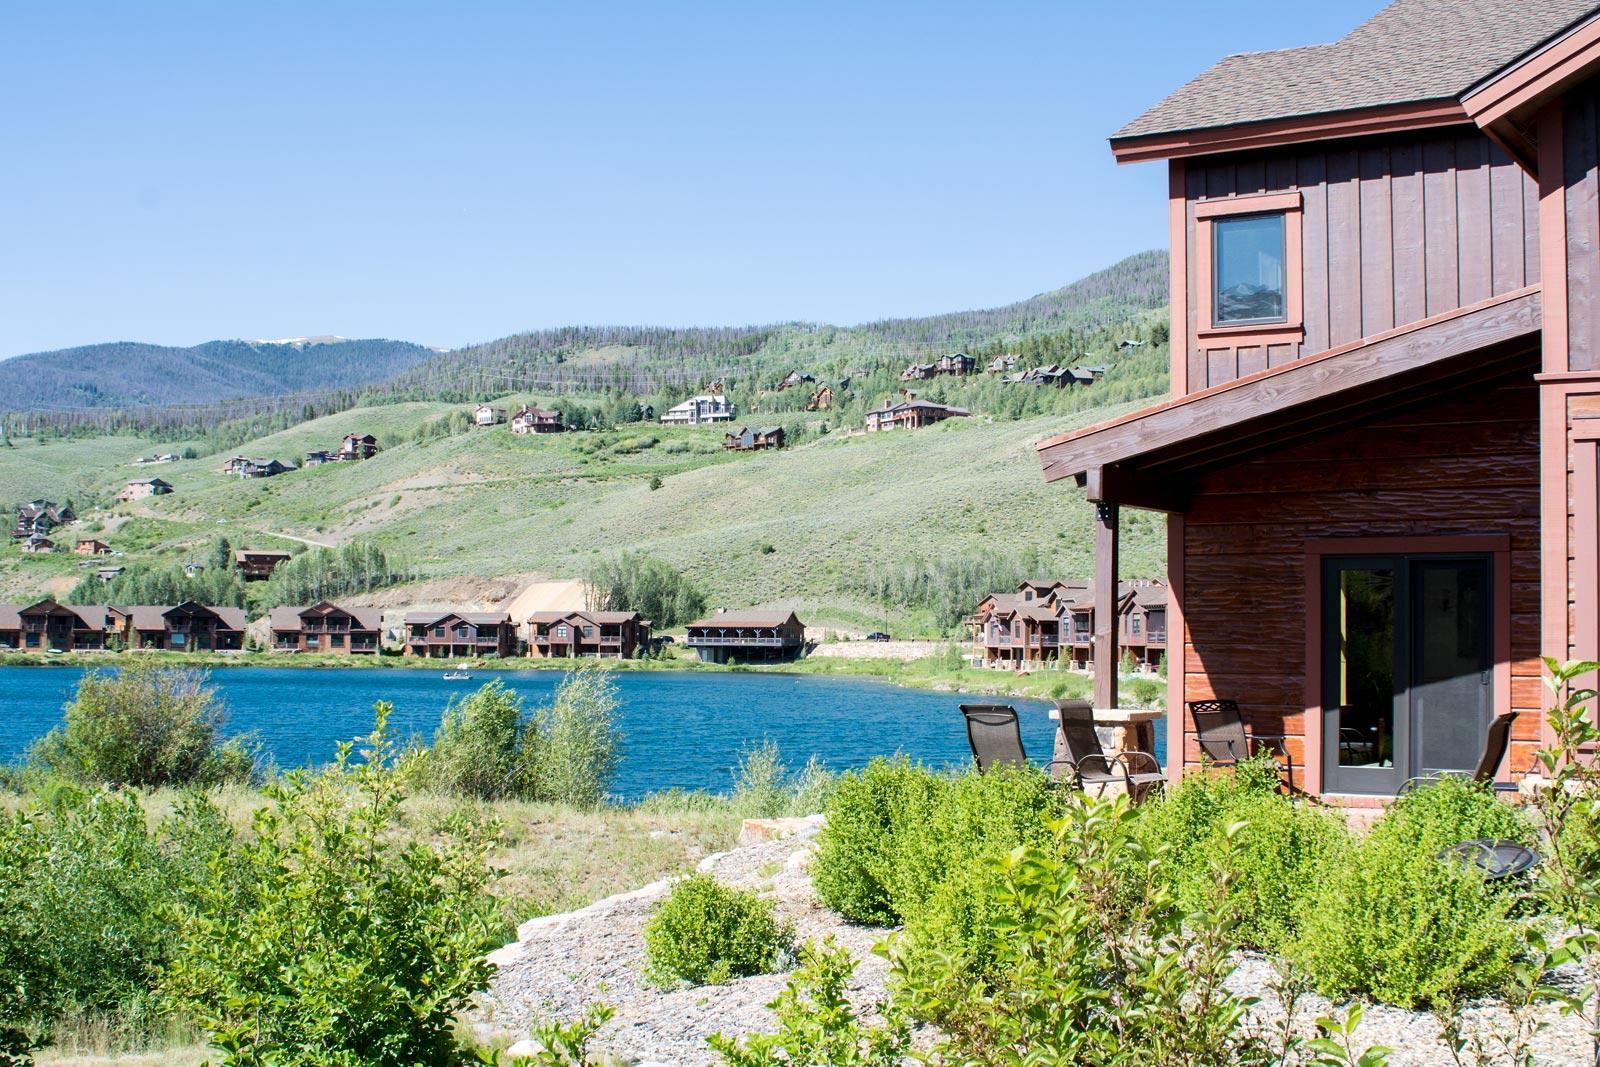 Angler Mountain Ranch centers around a community lake, with homes and duplexes offering a variety of price options.